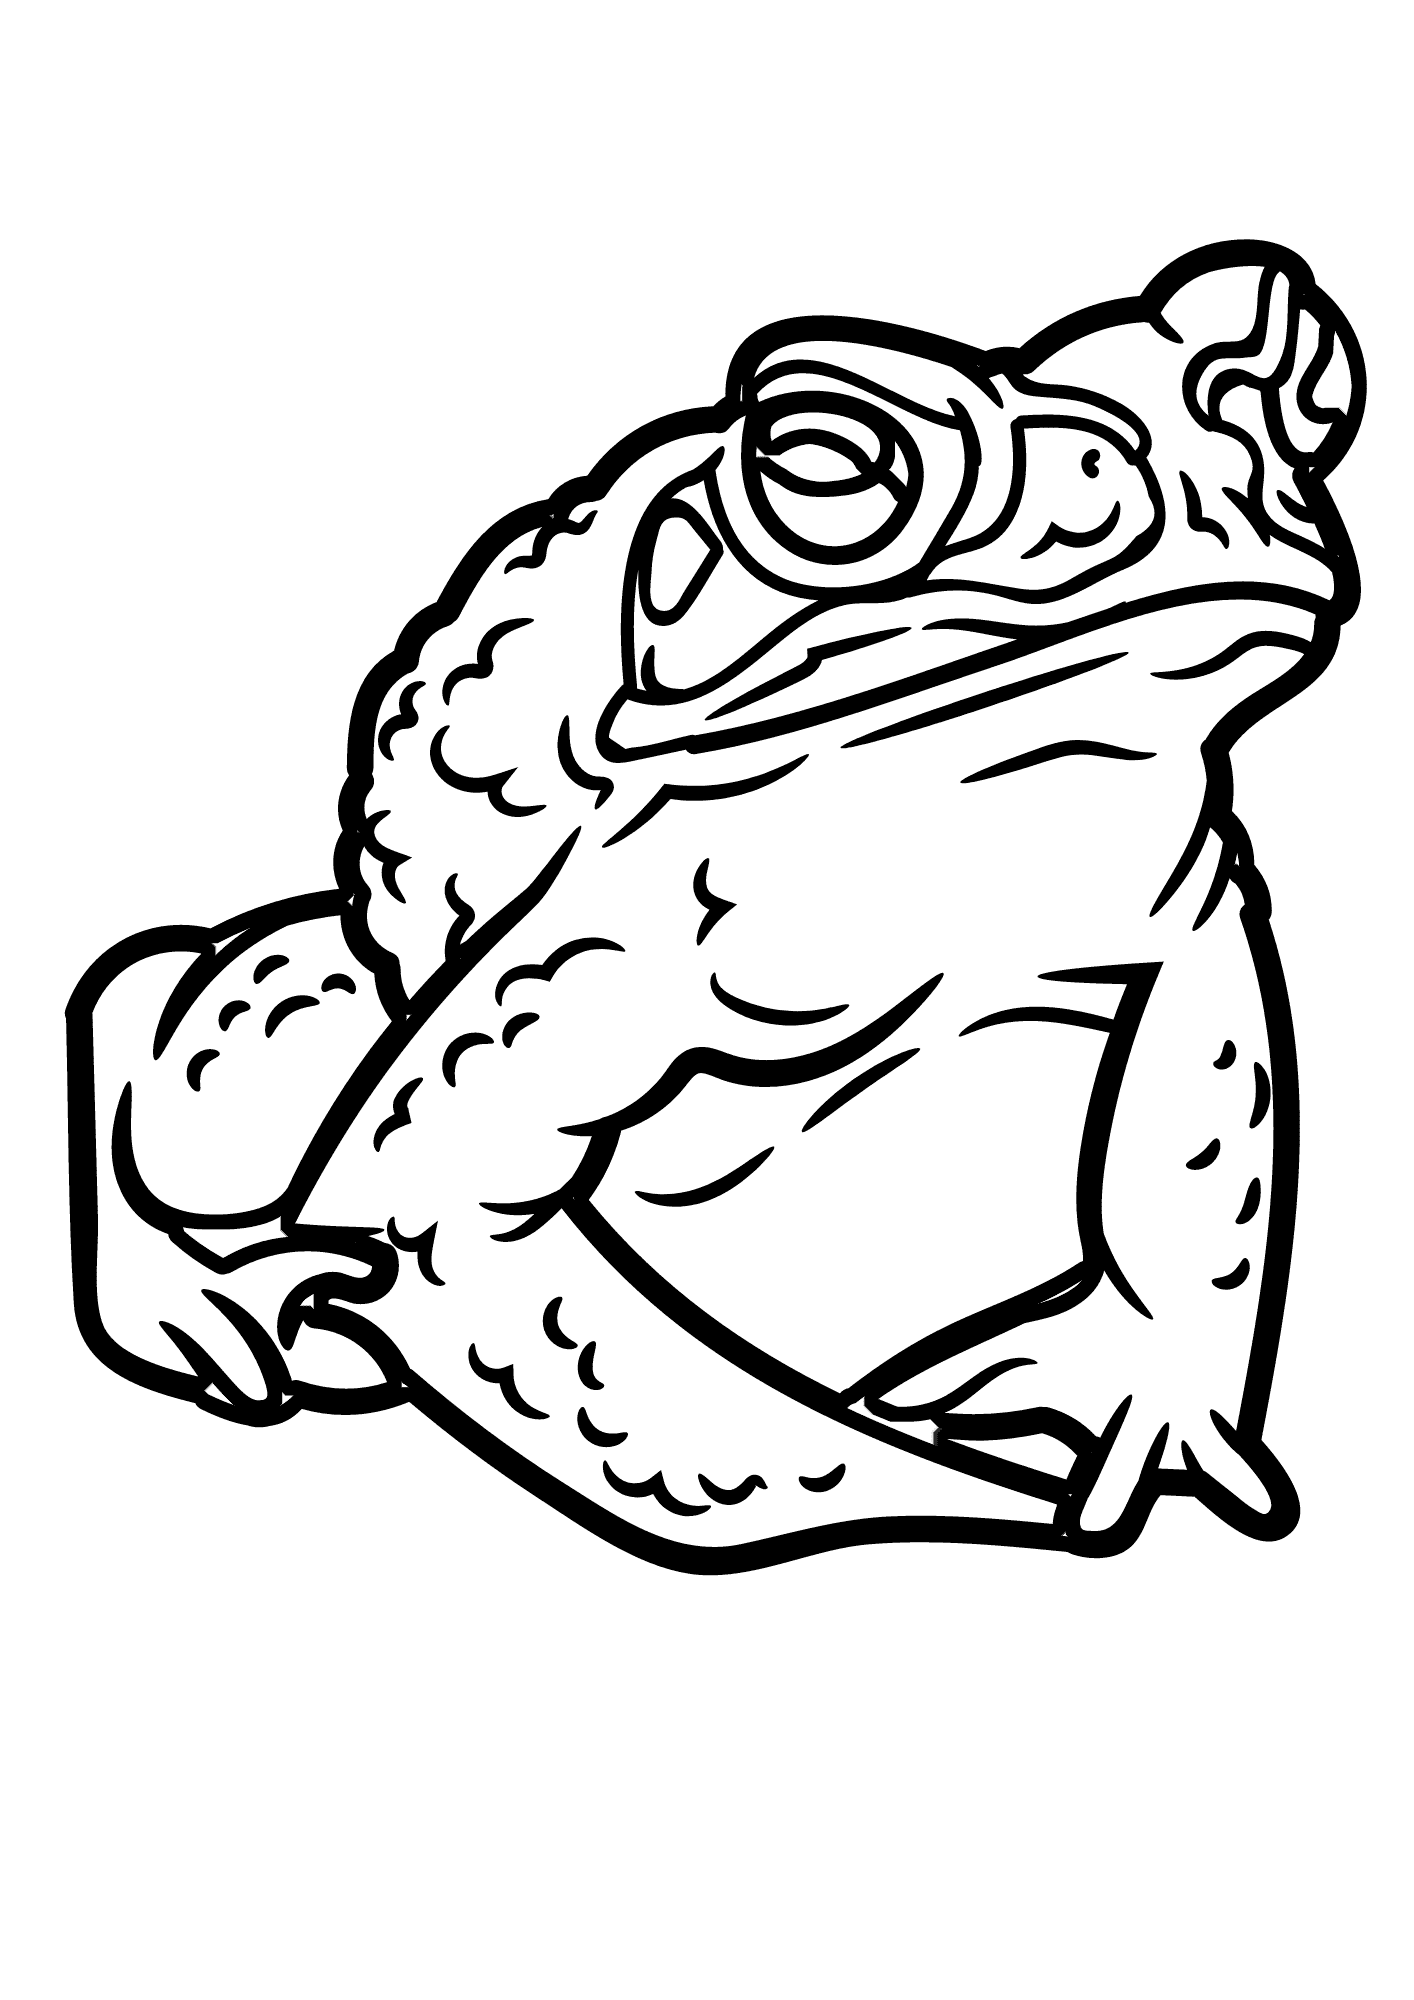 Toad Image Printable Coloring Pages